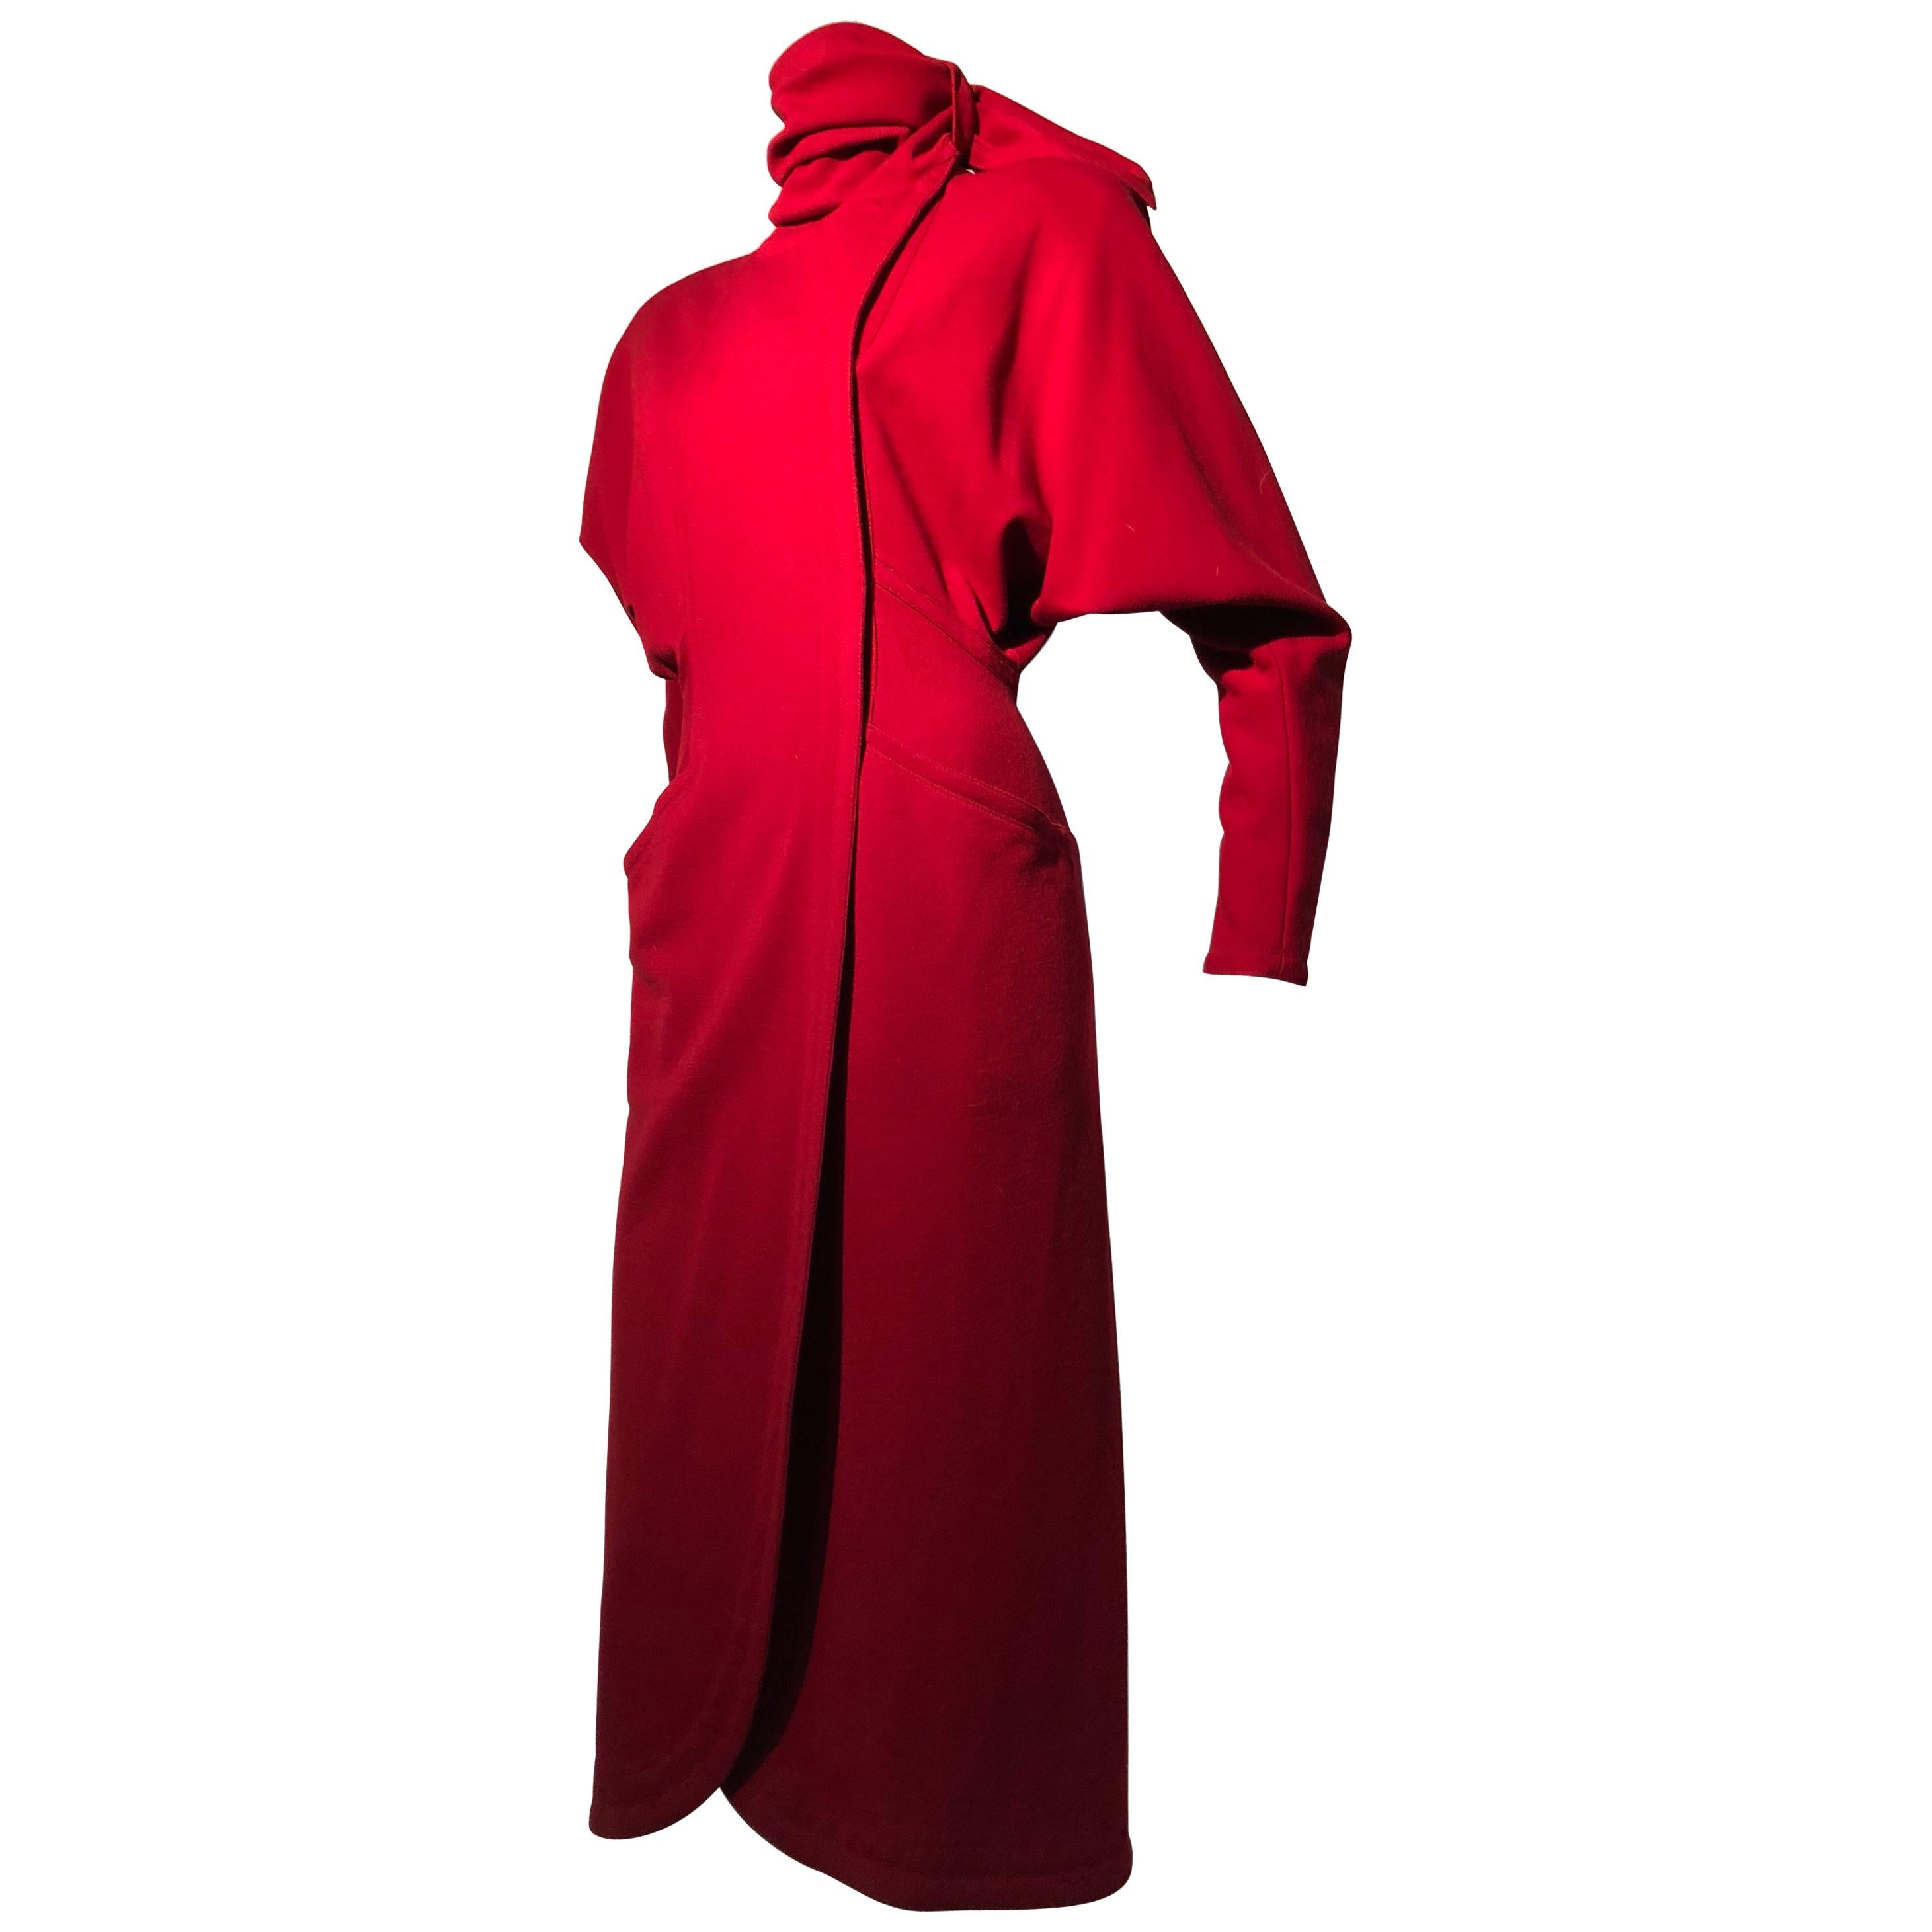 1980s Gianni Versace Vivid Red Wool Wrap-Style Coat Dress W/ Attached Foulard